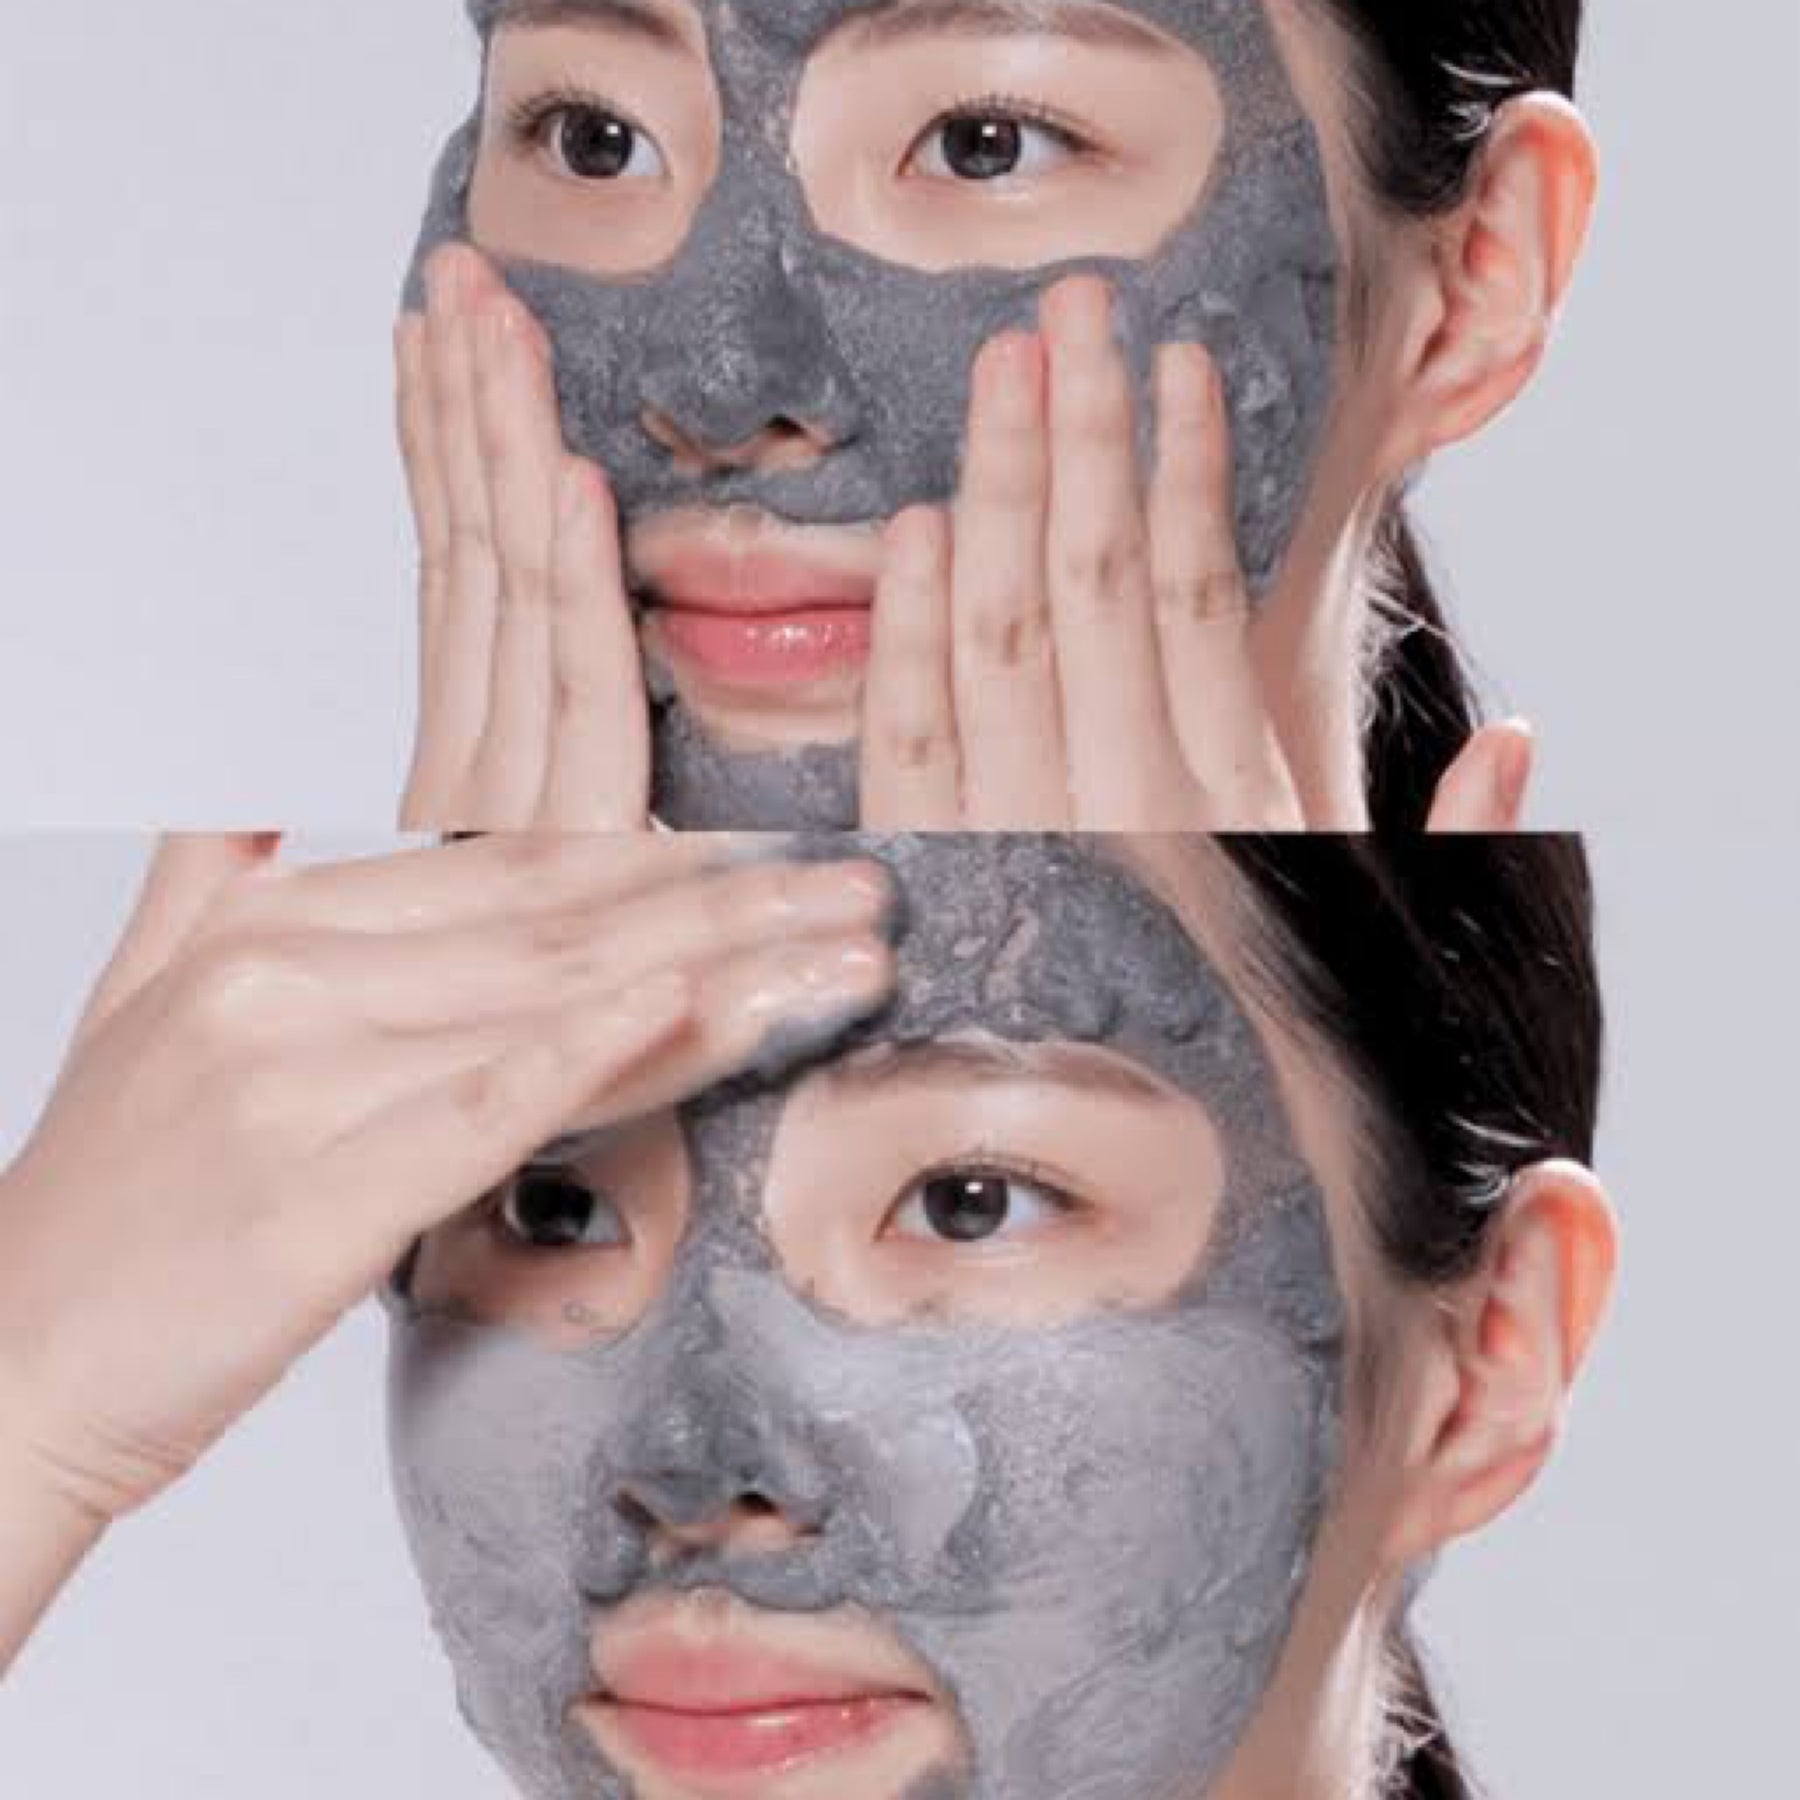 SOME BY MI CHARCOAL BHA CLAY BUBBLE MASK